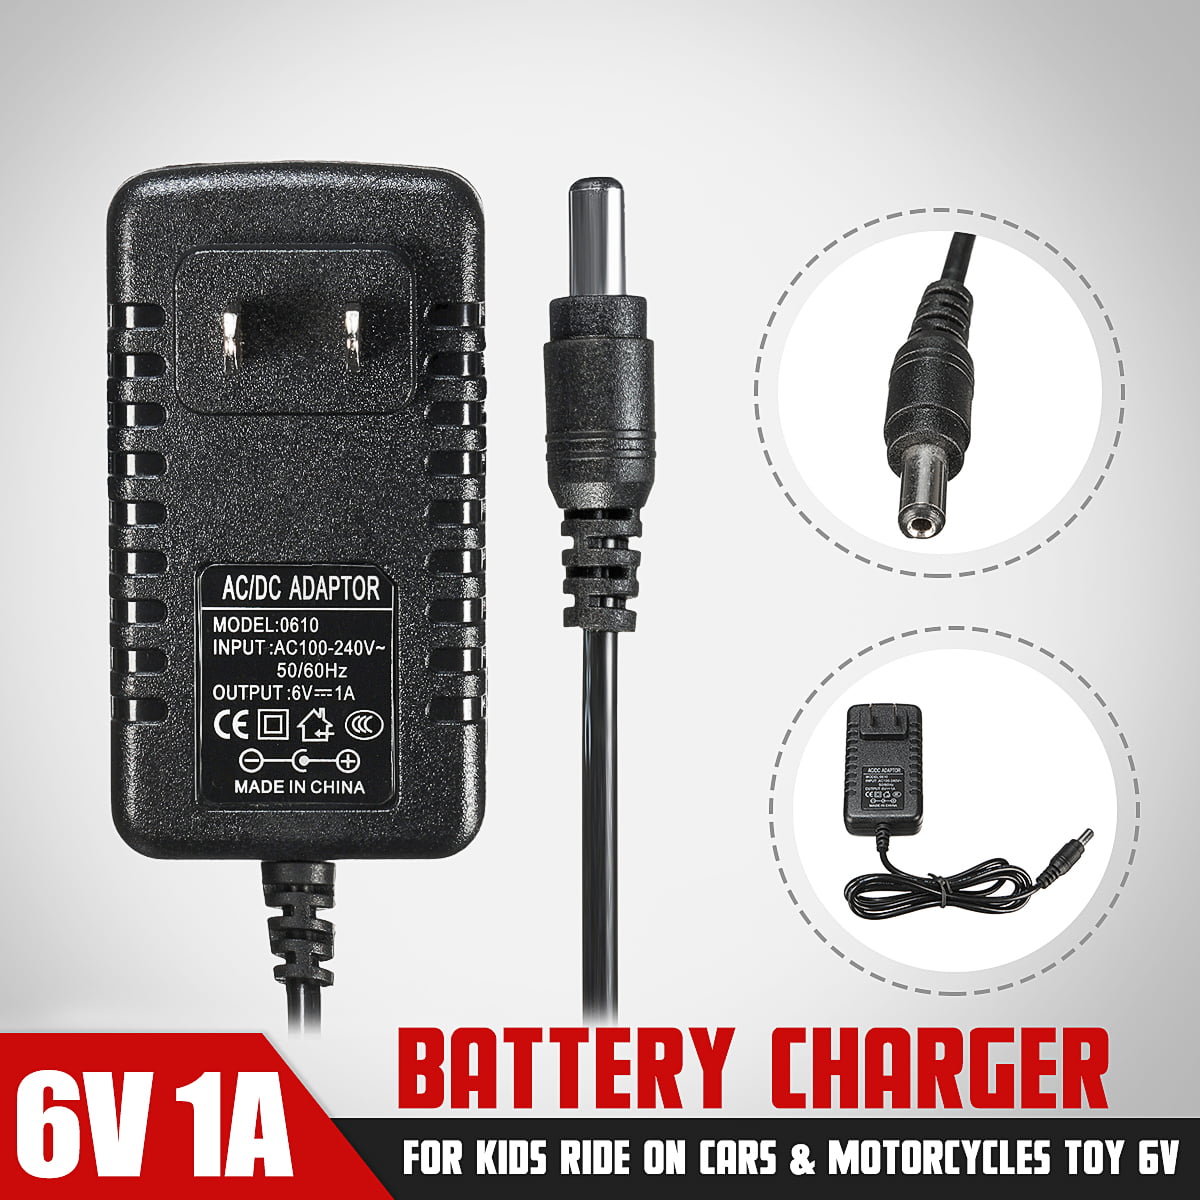 6V 500mA/1A Battery Charger Adapter For Kids Ride On Car ATV Quad 